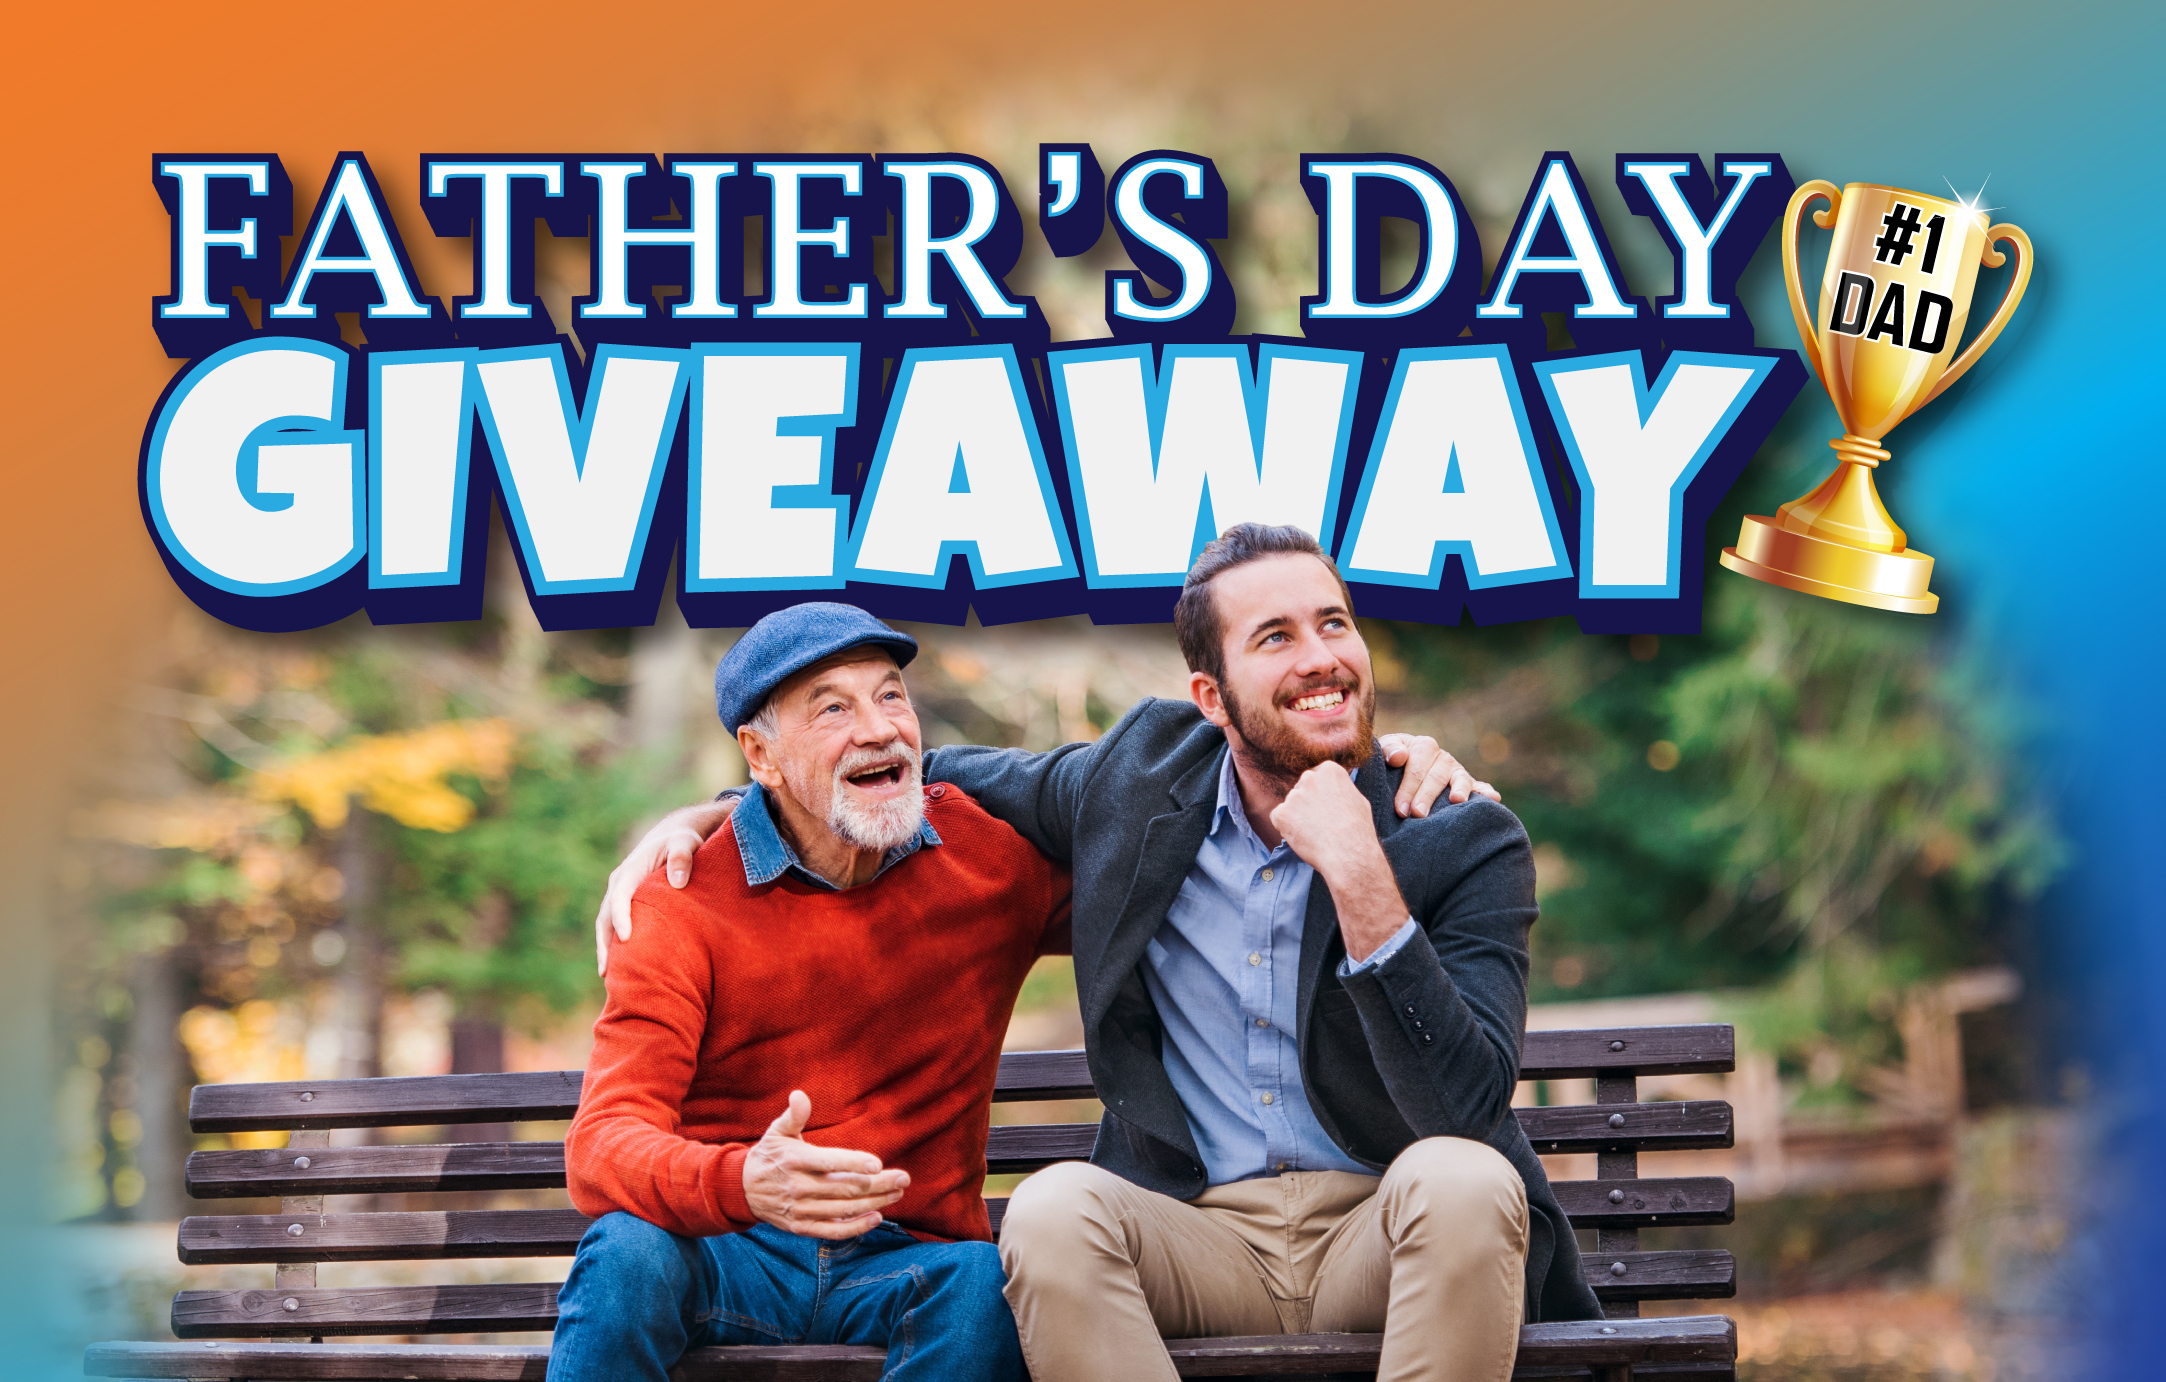 Desert Diamond Casino West Valley Fathers Day Giveaway